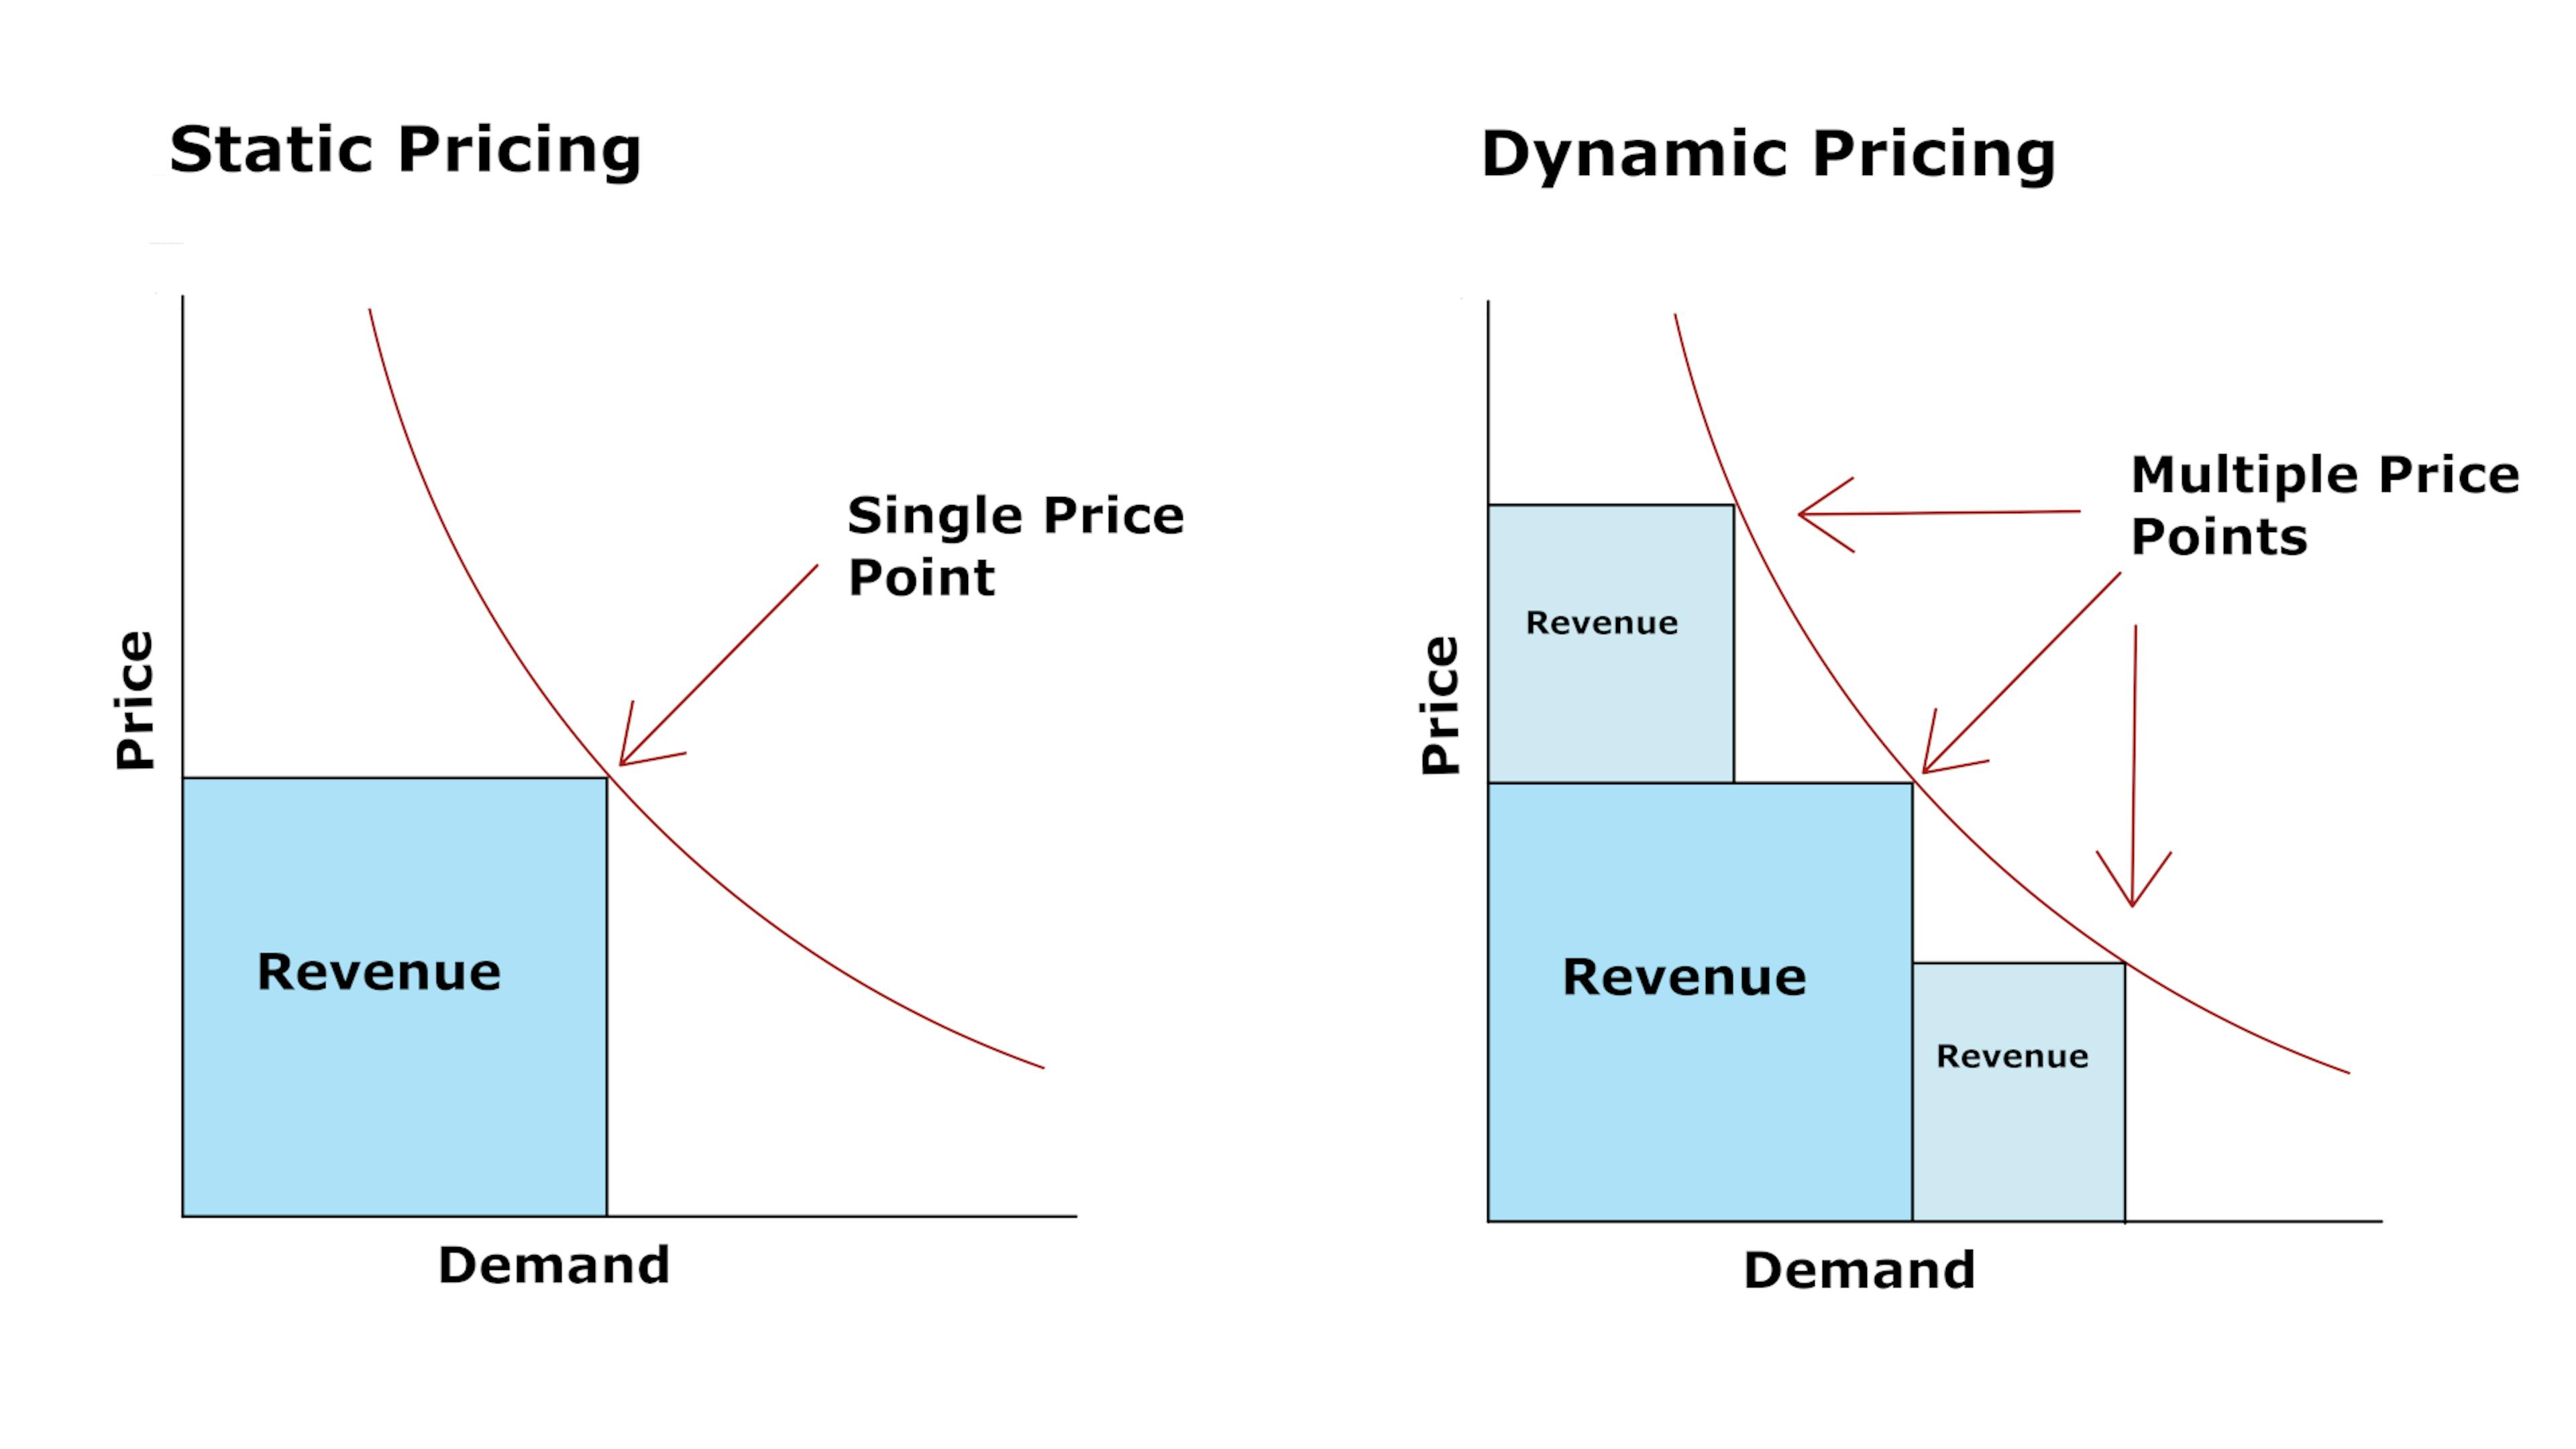 Two graphs next to each other, the one on the left shows a static pricing model and the one on the right shows a dynamic pricing model